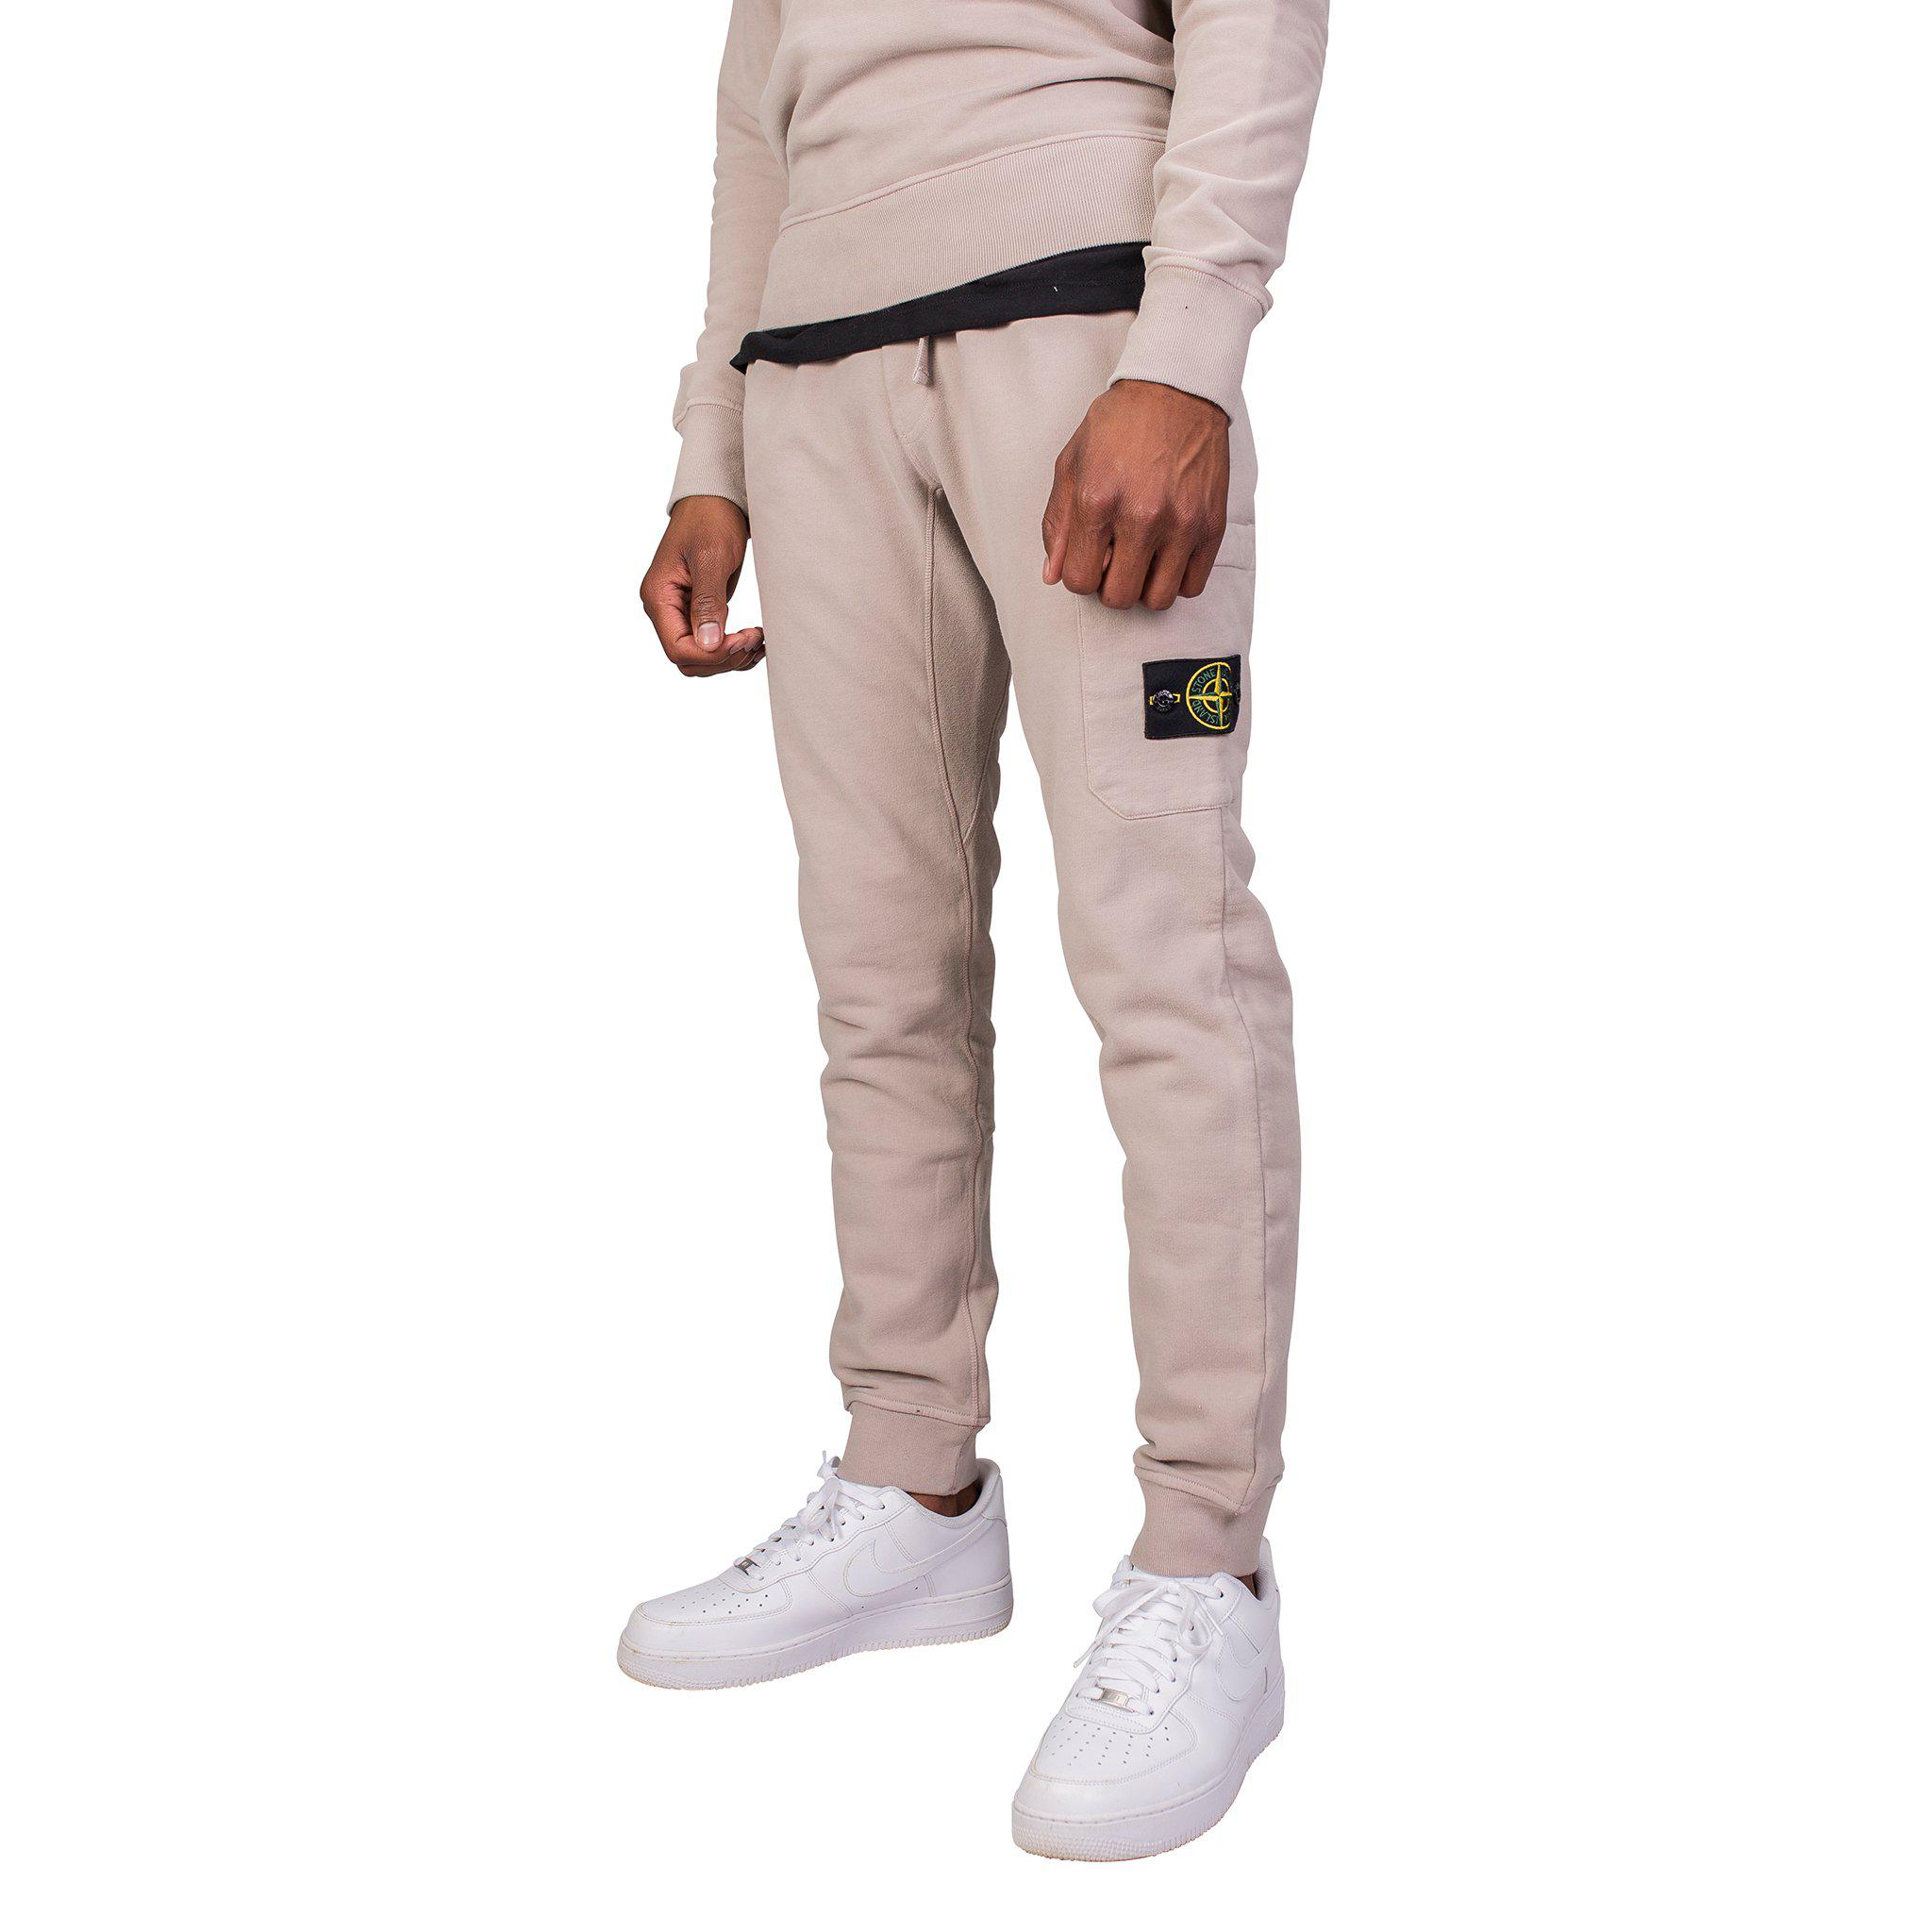 Stone Island Cotton Cargo Sweatpants in Gray for Men - Lyst